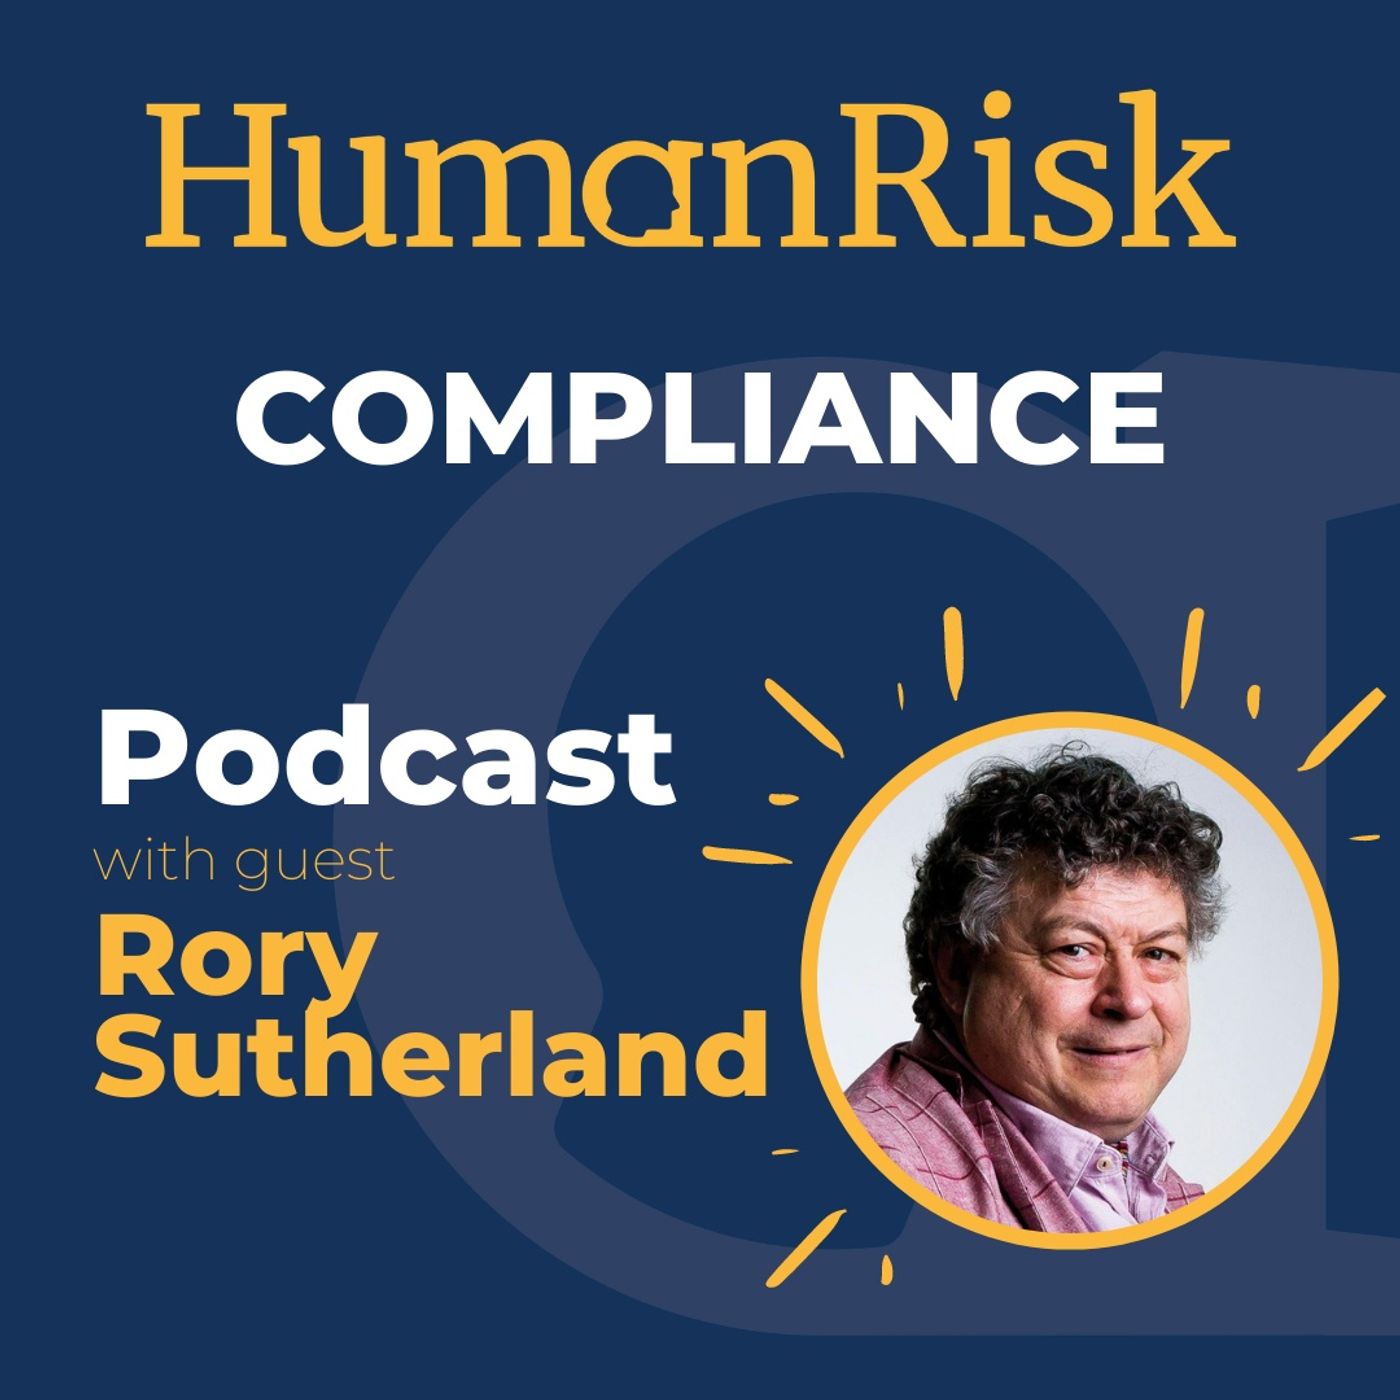 Rory Sutherland on Compliance